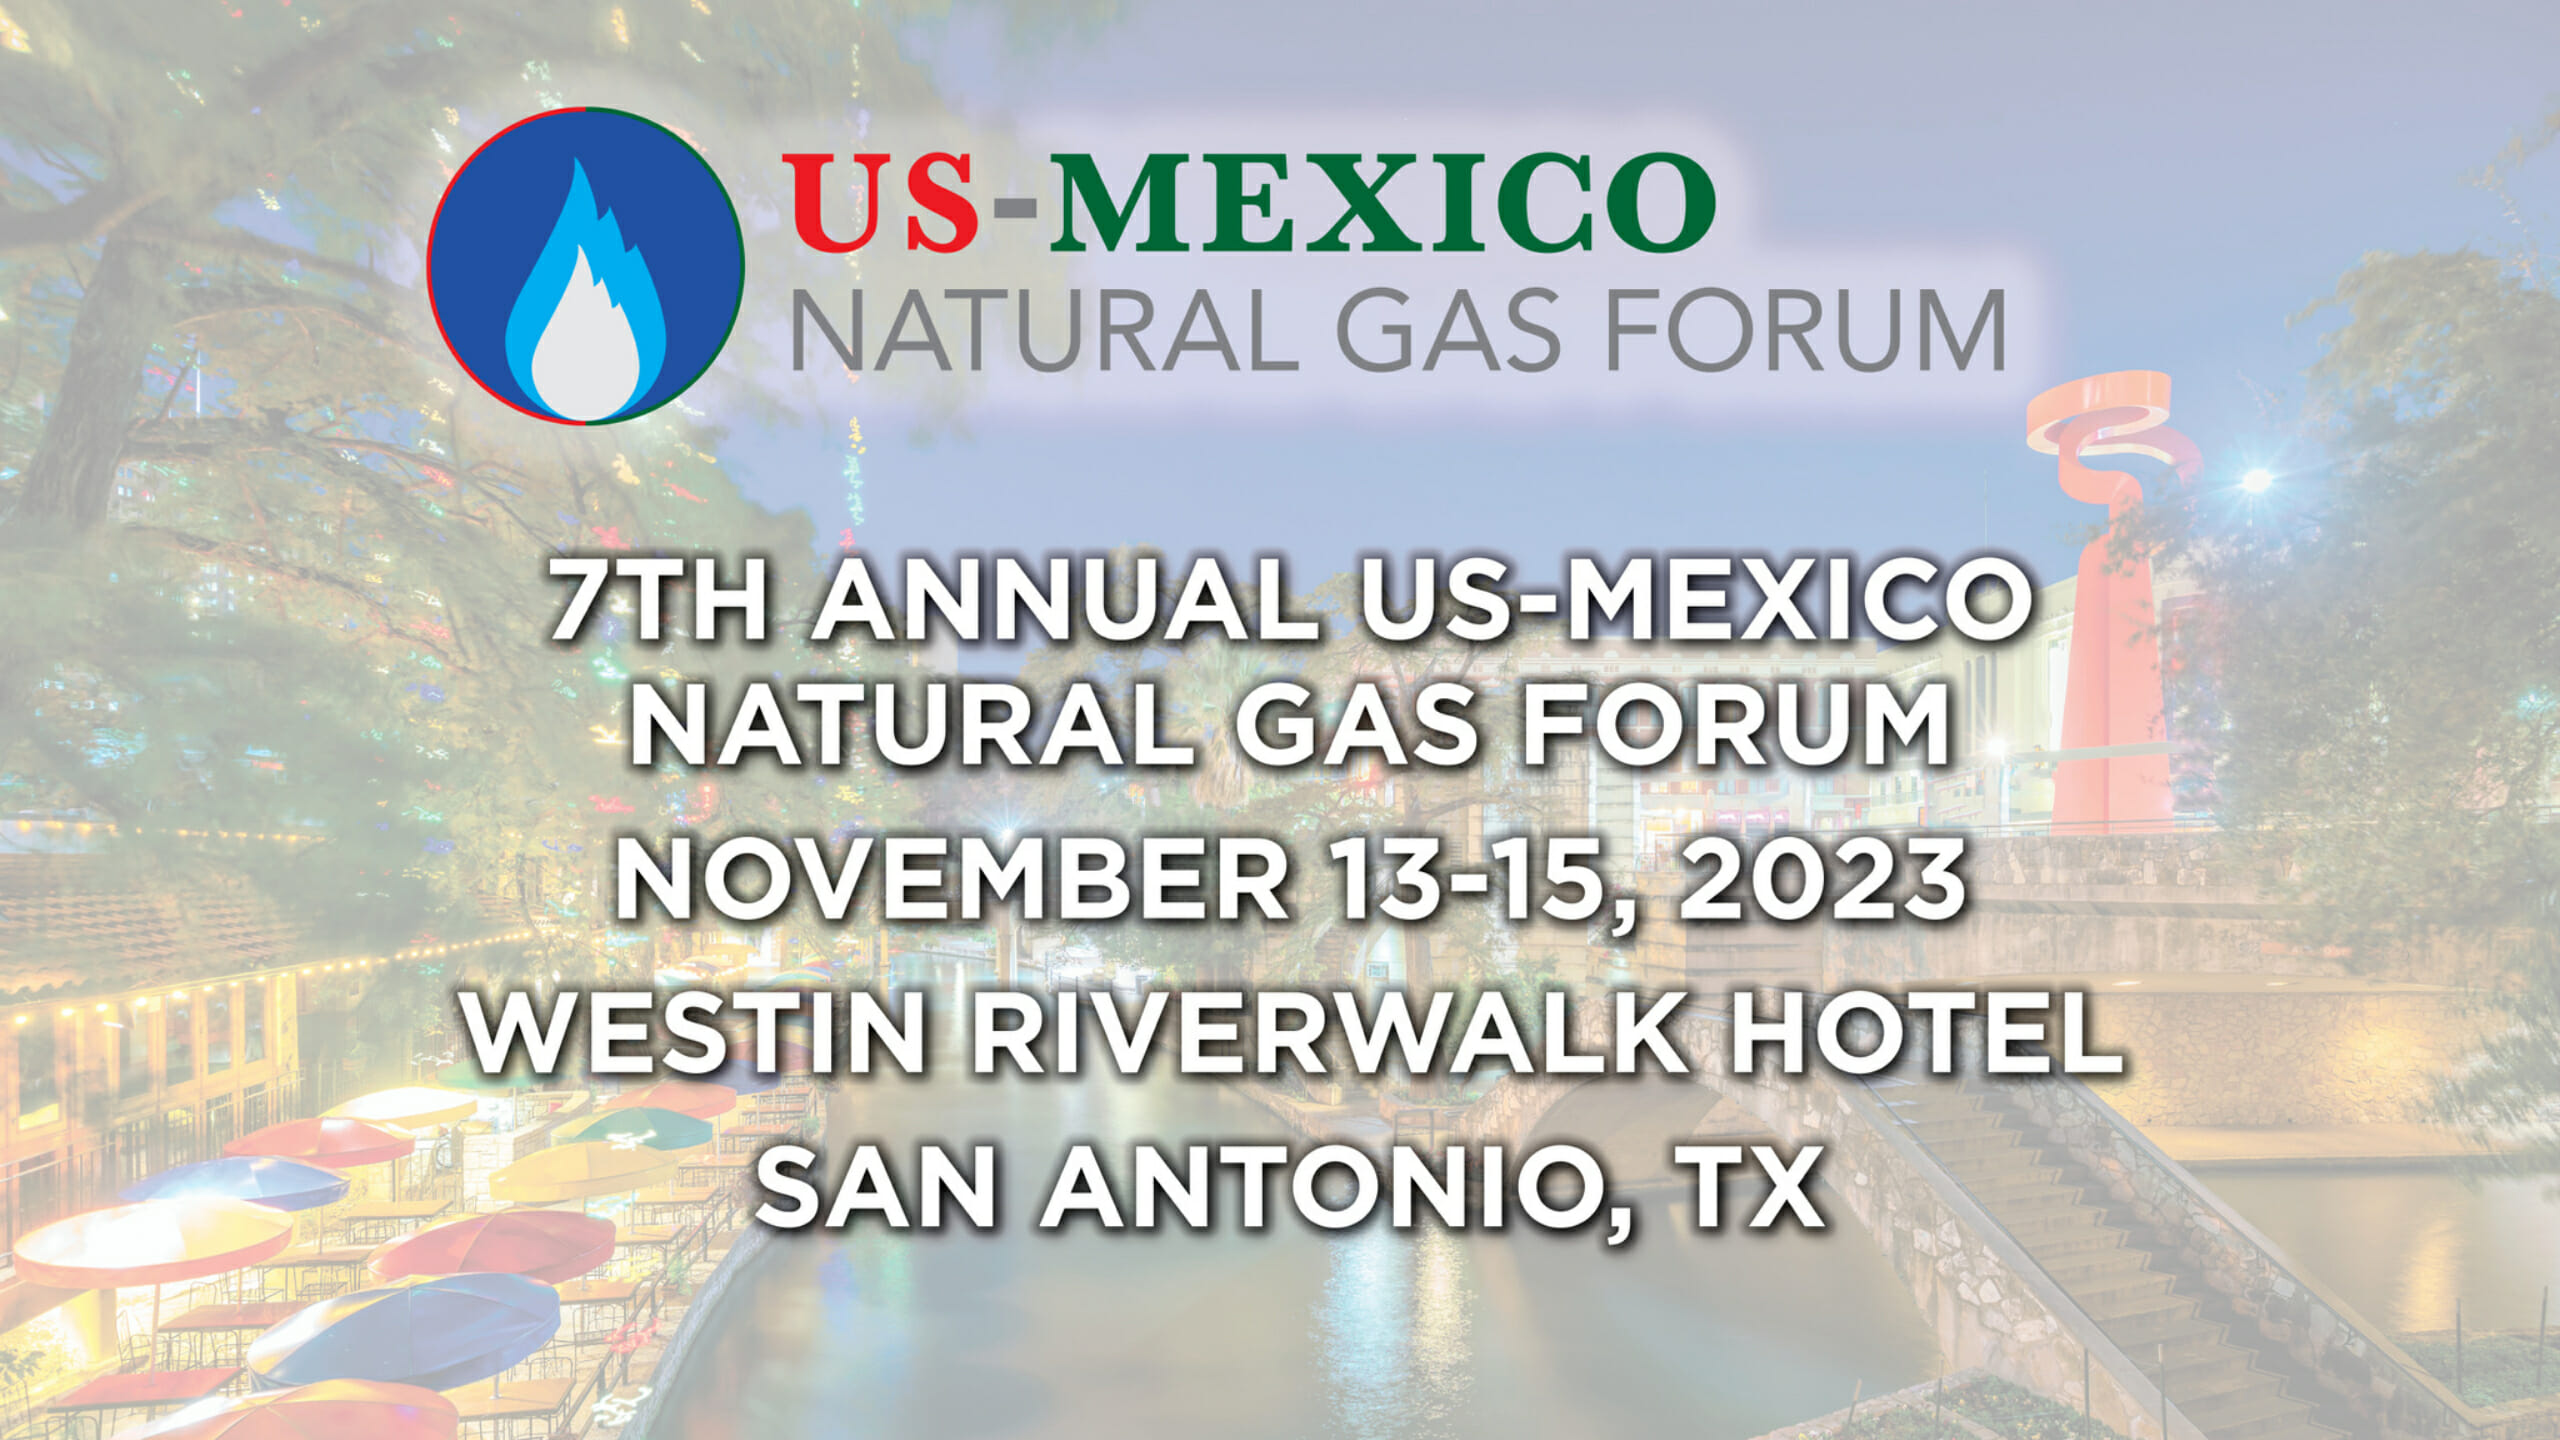 2023 Oil and Gas Industry Events